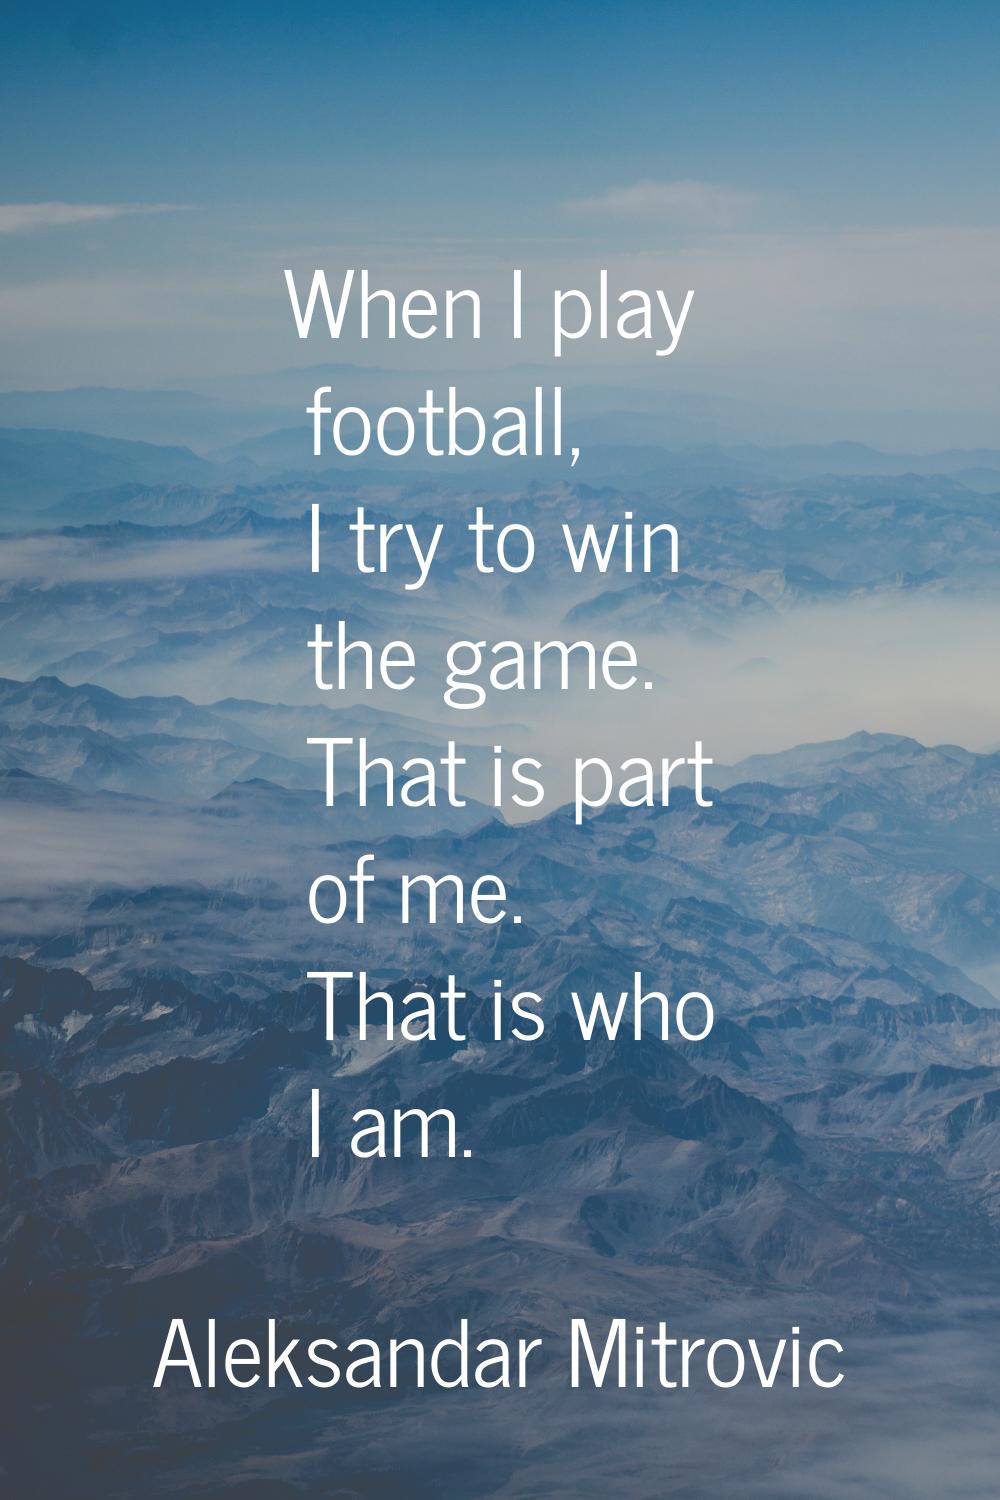 When I play football, I try to win the game. That is part of me. That is who I am.